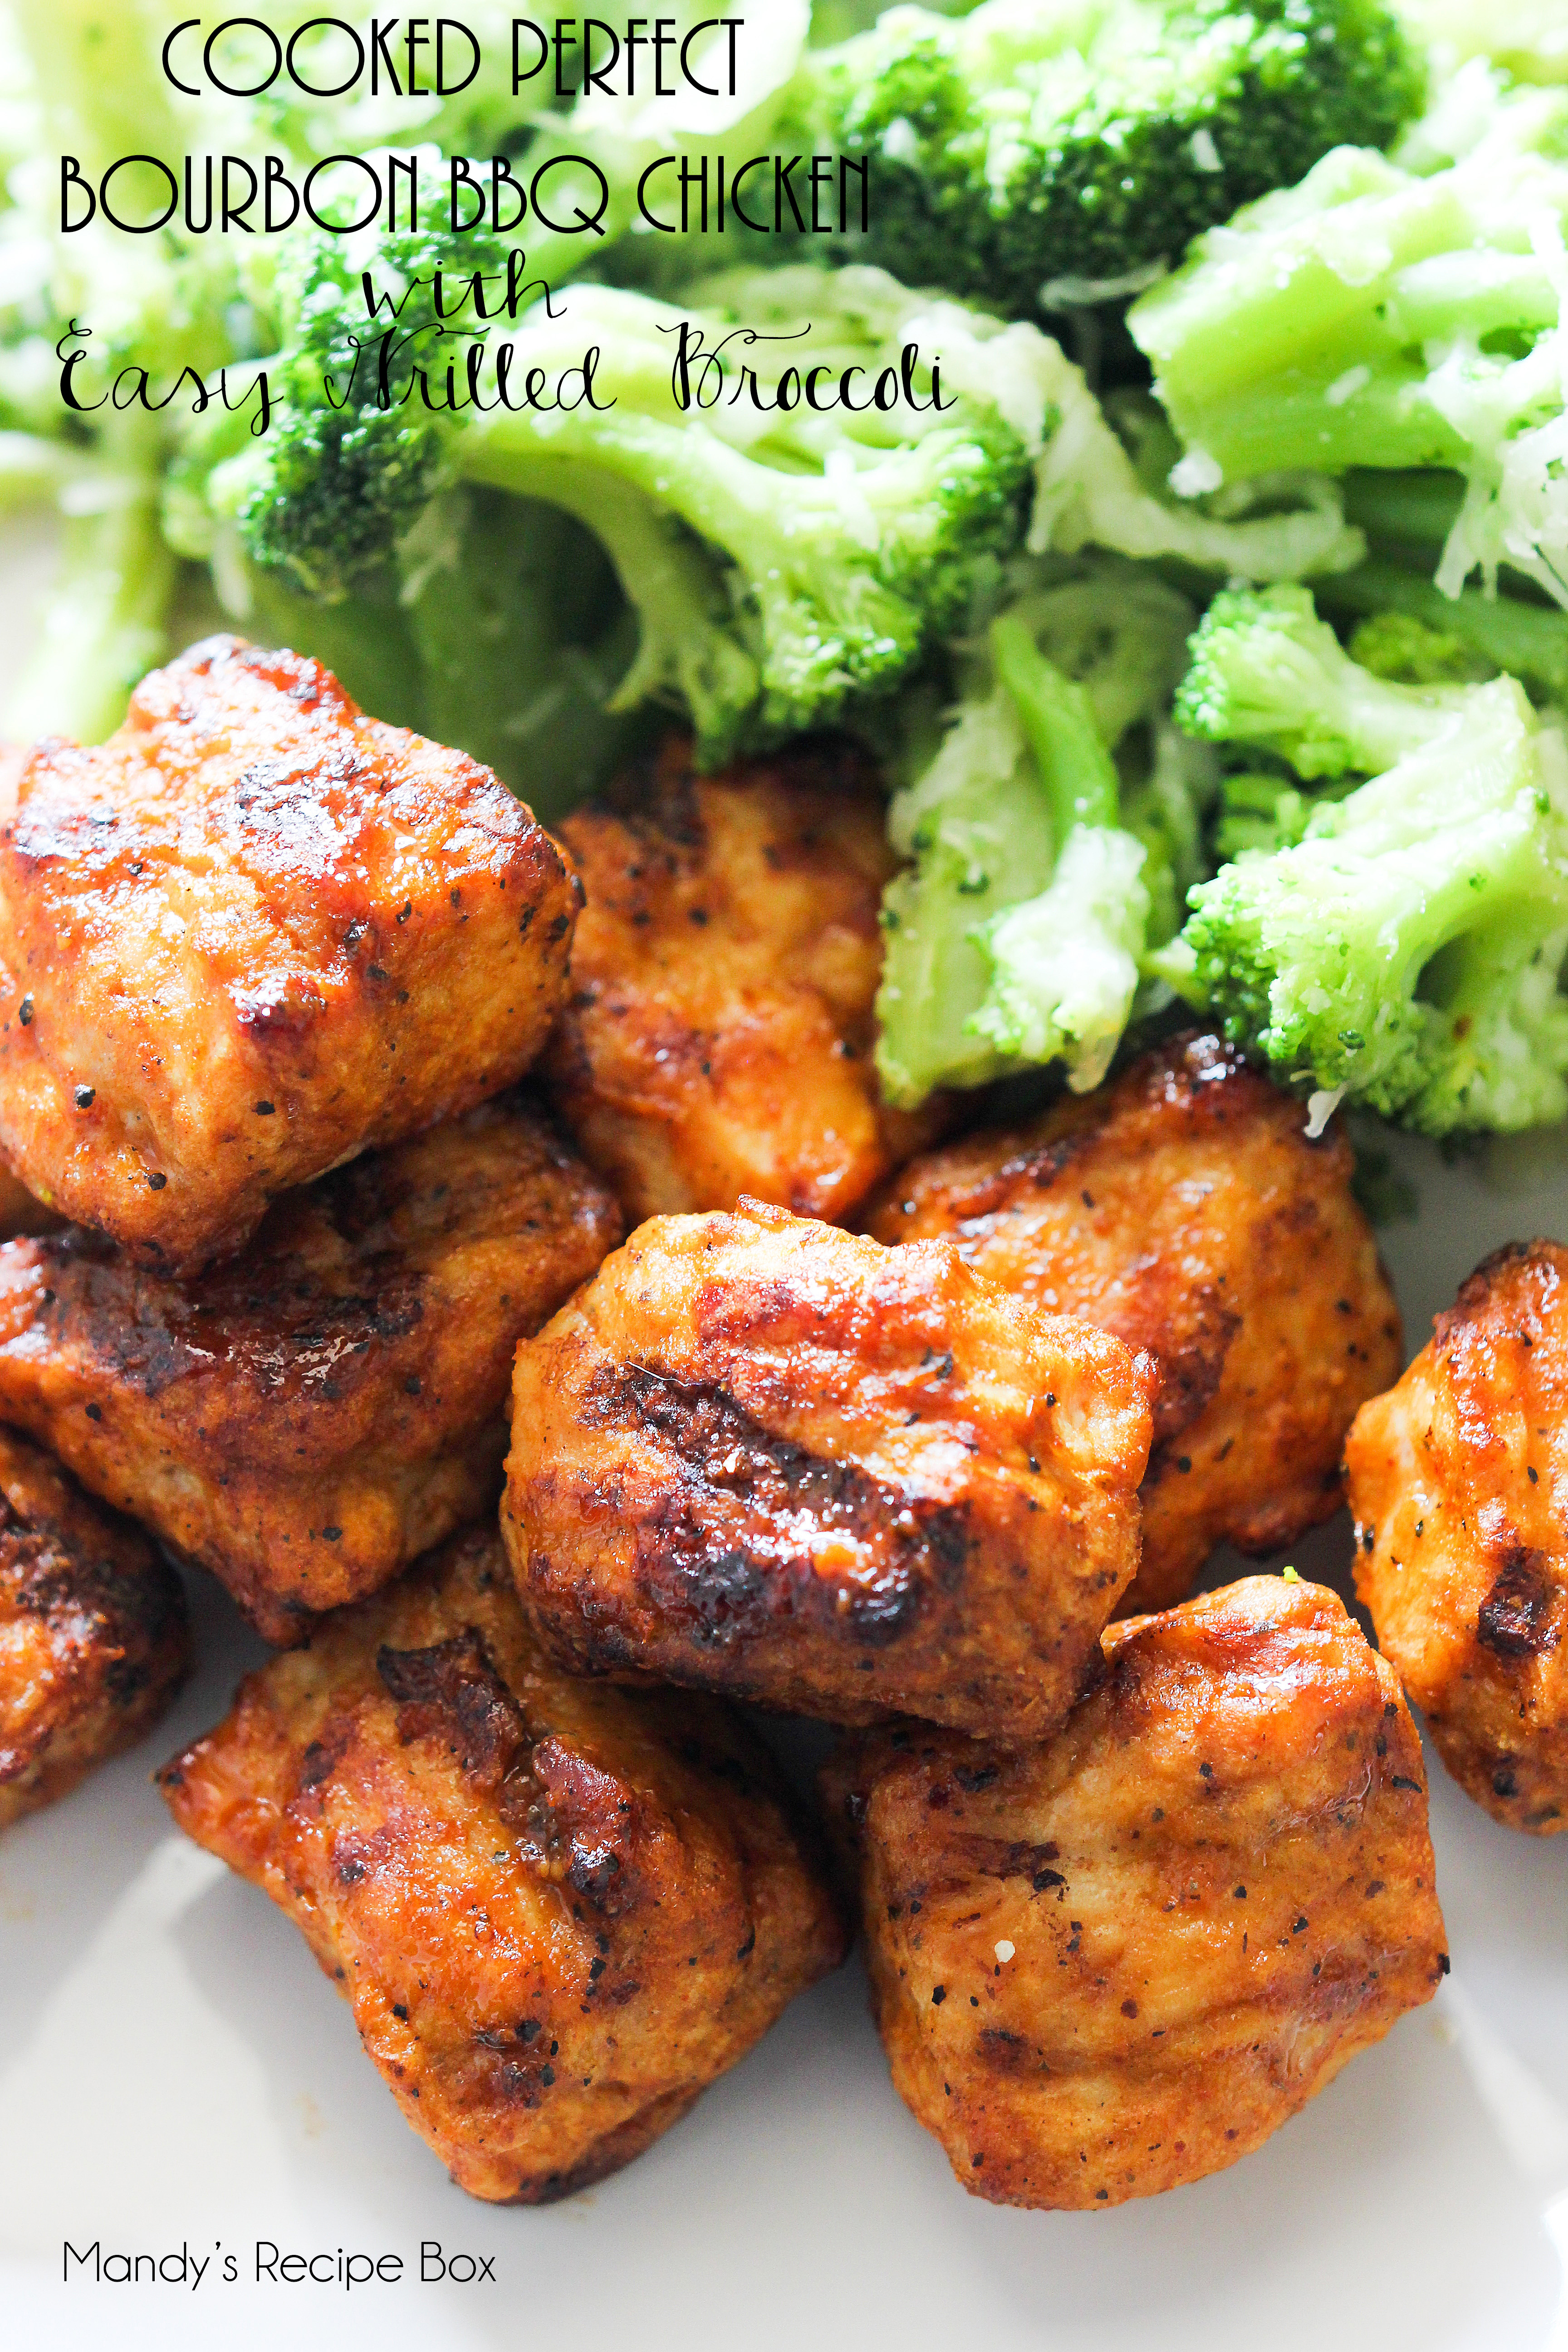 Cooked Perfect Bourbon BBQ Chicken with Easy Roasted Broccoli